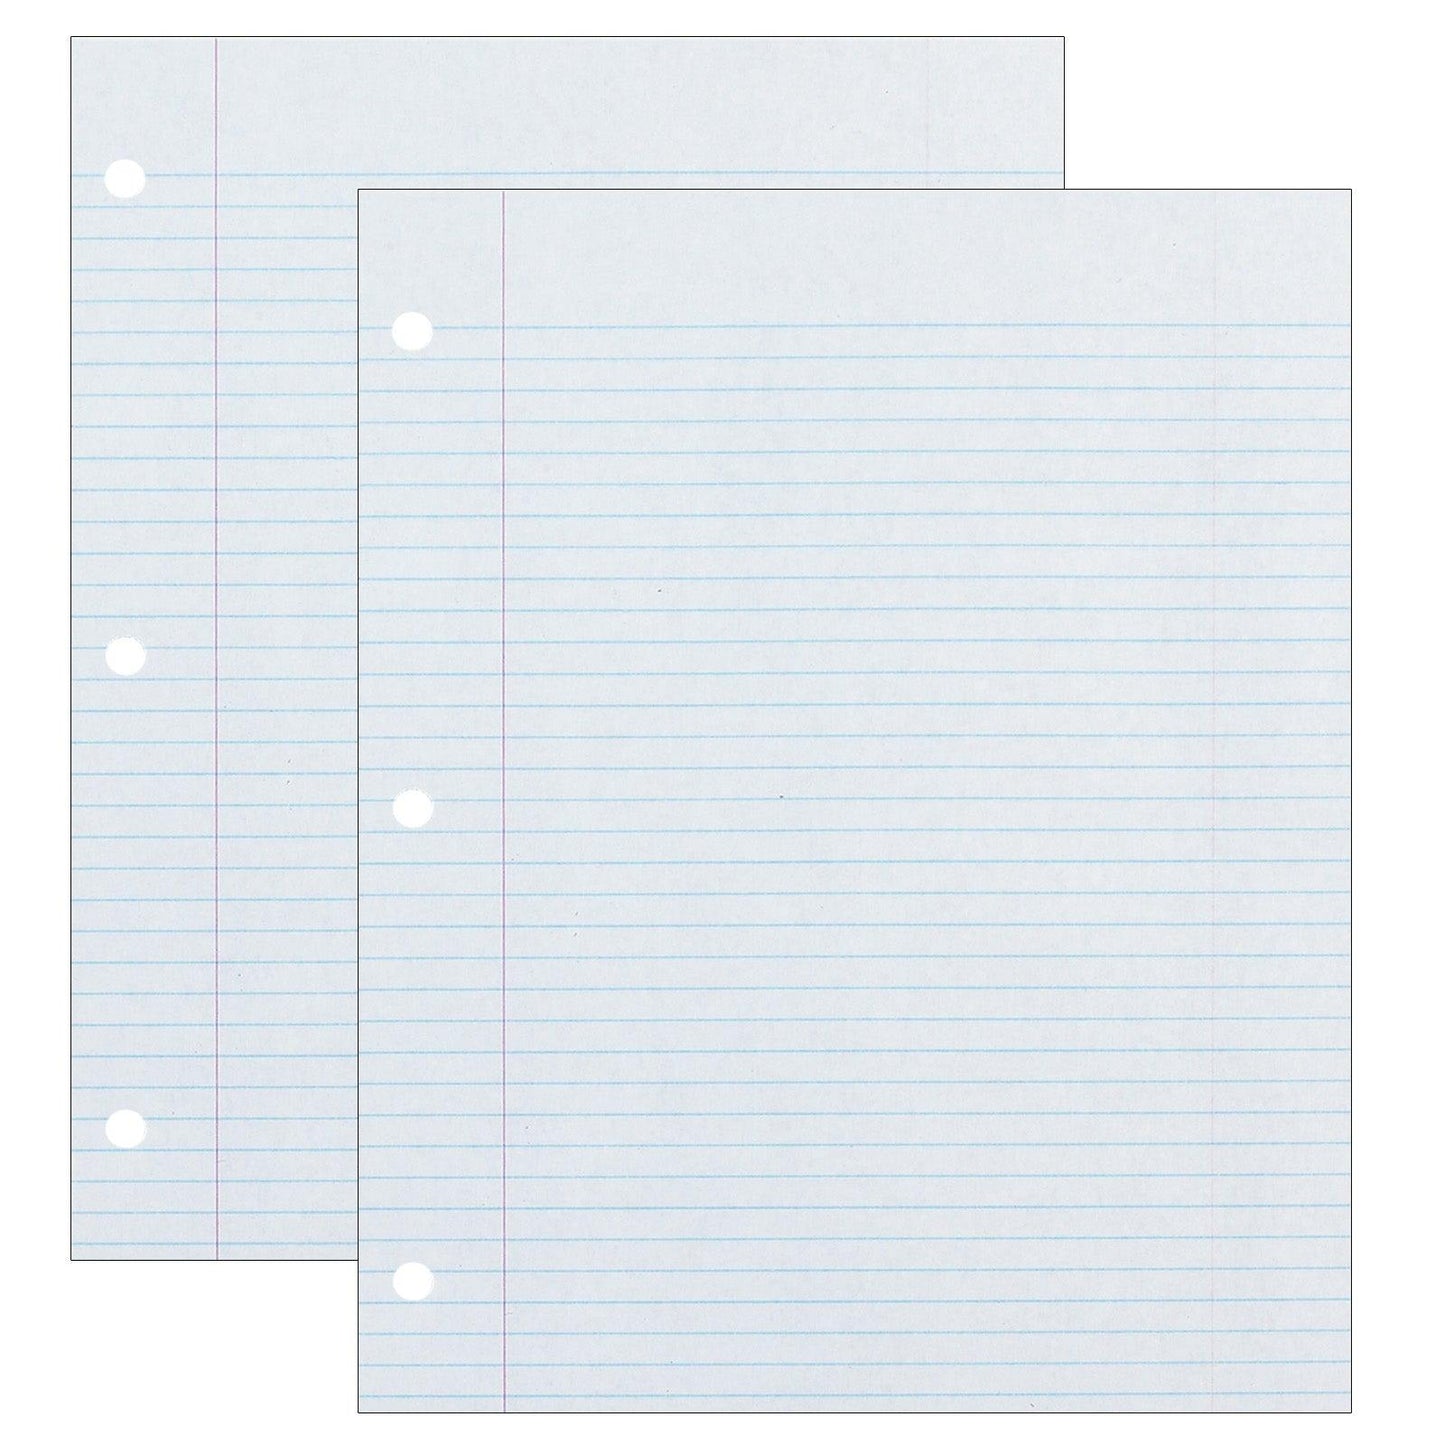 Recycled Filler Paper, White, 3-Hole Punched, 9/32" Ruled w/ Margin 8-1/2" x 11", 500 Sheets Per Pack, 2 Packs - Loomini